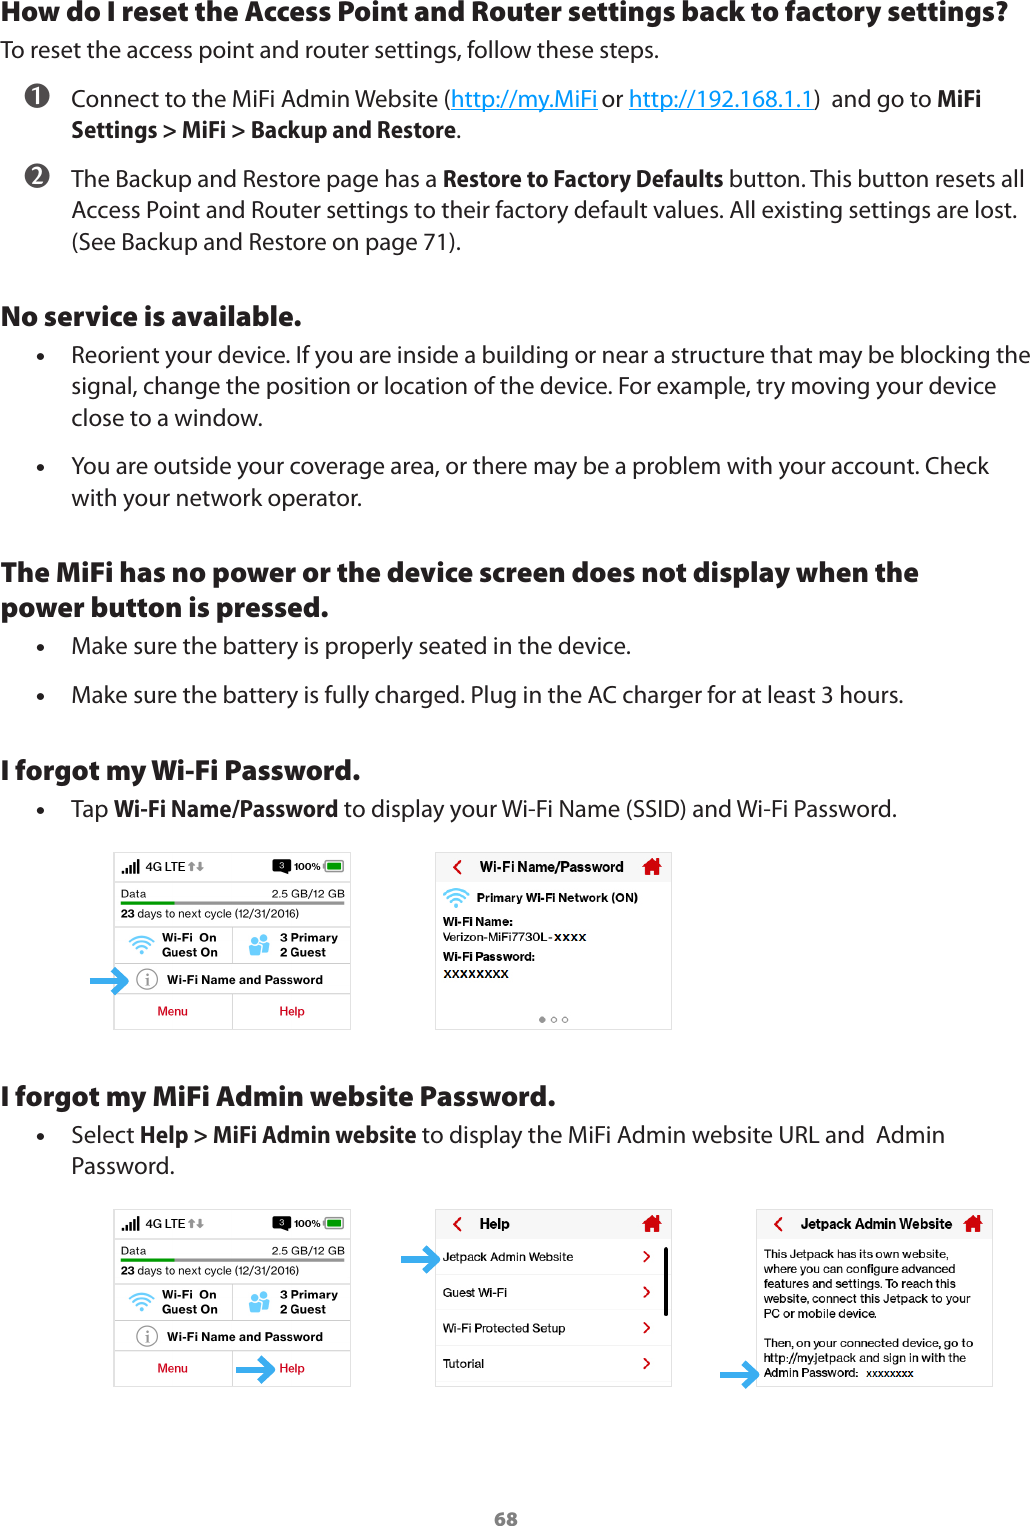 68How do I reset the Access Point and Router settings back to factory settings?To reset the access point and router settings, follow these steps.➊Connect to the MiFi Admin Website (http://my.MiFi or http://192.168.1.1)  and go to MiFiSettings &gt; MiFi &gt; Backup and Restore.➋The Backup and Restore page has a Restore to Factory Defaults button. This button resets allAccess Point and Router settings to their factory default values. All existing settings are lost.(See Backup and Restore on page 71).No service is available. •Reorient your device. If you are inside a building or near a structure that may be blocking thesignal, change the position or location of the device. For example, try moving your deviceclose to a window. •You are outside your coverage area, or there may be a problem with your account. Checkwith your network operator.The MiFi has no power or the device screen does not display when the power button is pressed. •Make sure the battery is properly seated in the device. •Make sure the battery is fully charged. Plug in the AC charger for at least 3 hours.I forgot my Wi-Fi Password. •Tap Wi-Fi Name/Password to display your Wi-Fi Name (SSID) and Wi-Fi Password.I forgot my MiFi Admin website Password. •Select Help &gt; MiFi Admin website to display the MiFi Admin website URL and  AdminPassword.